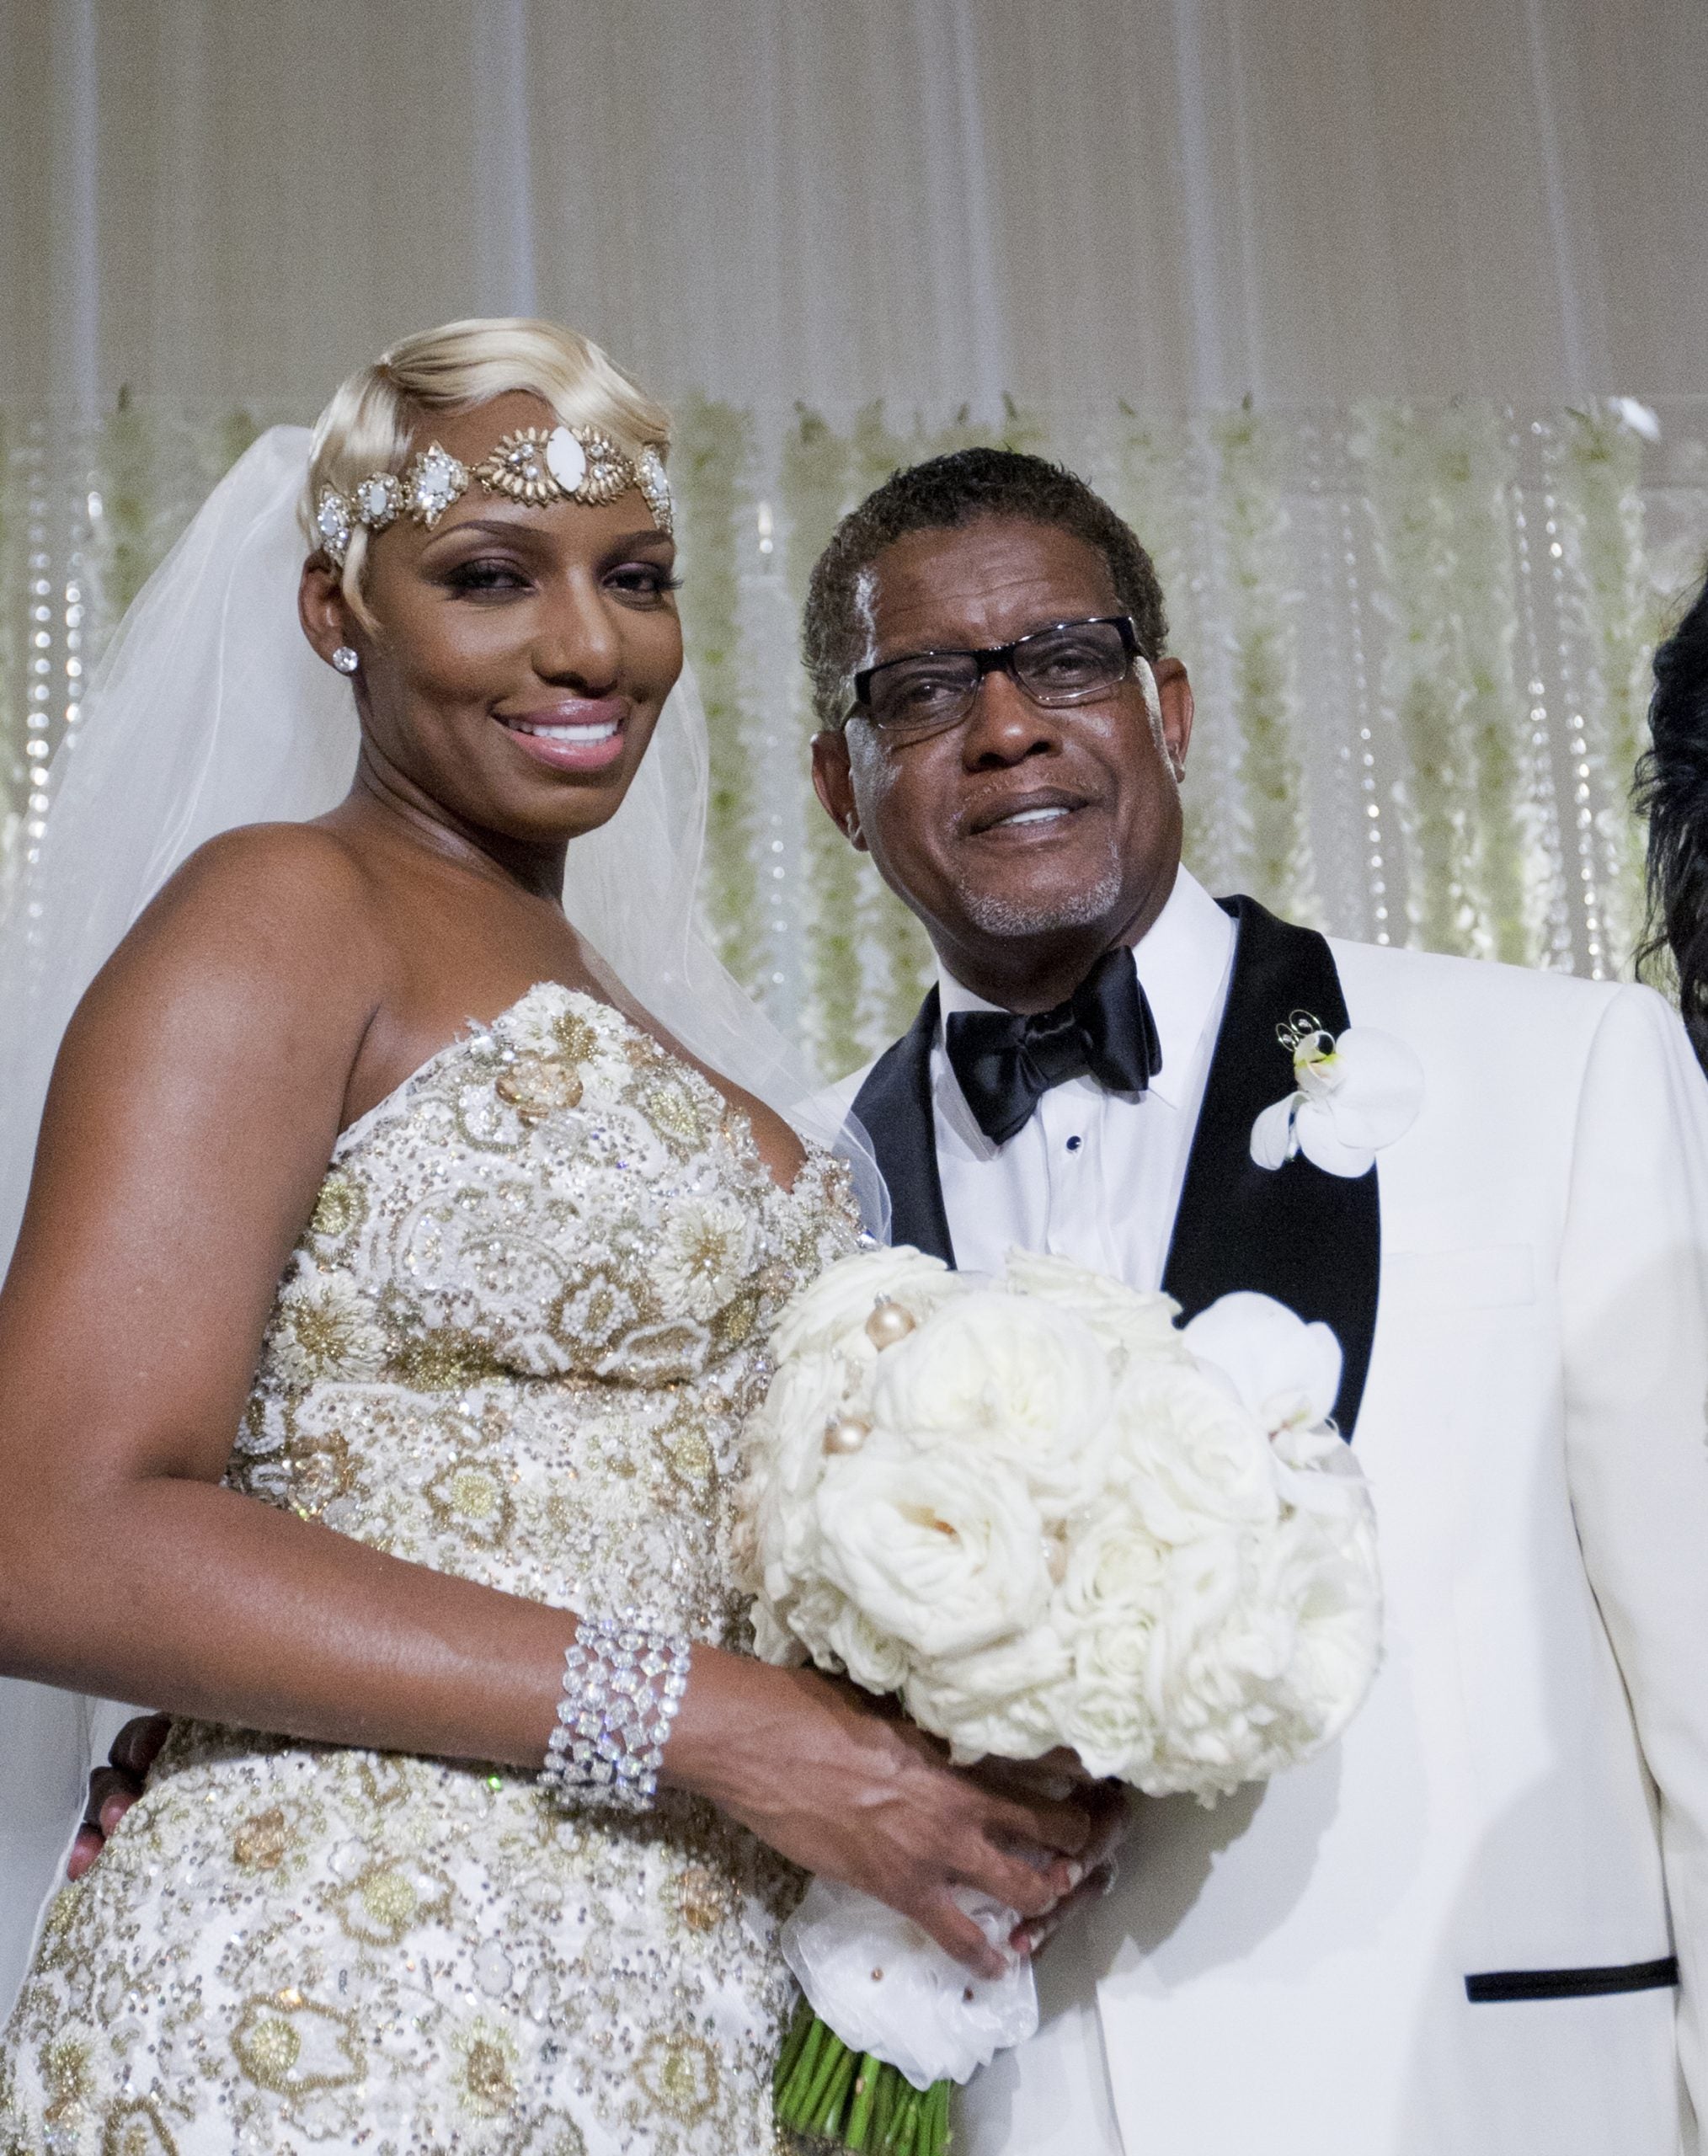 RHOA's Falynn Guobadia And Other Cast Members Who Filed For Divorce After Appearing On The Show